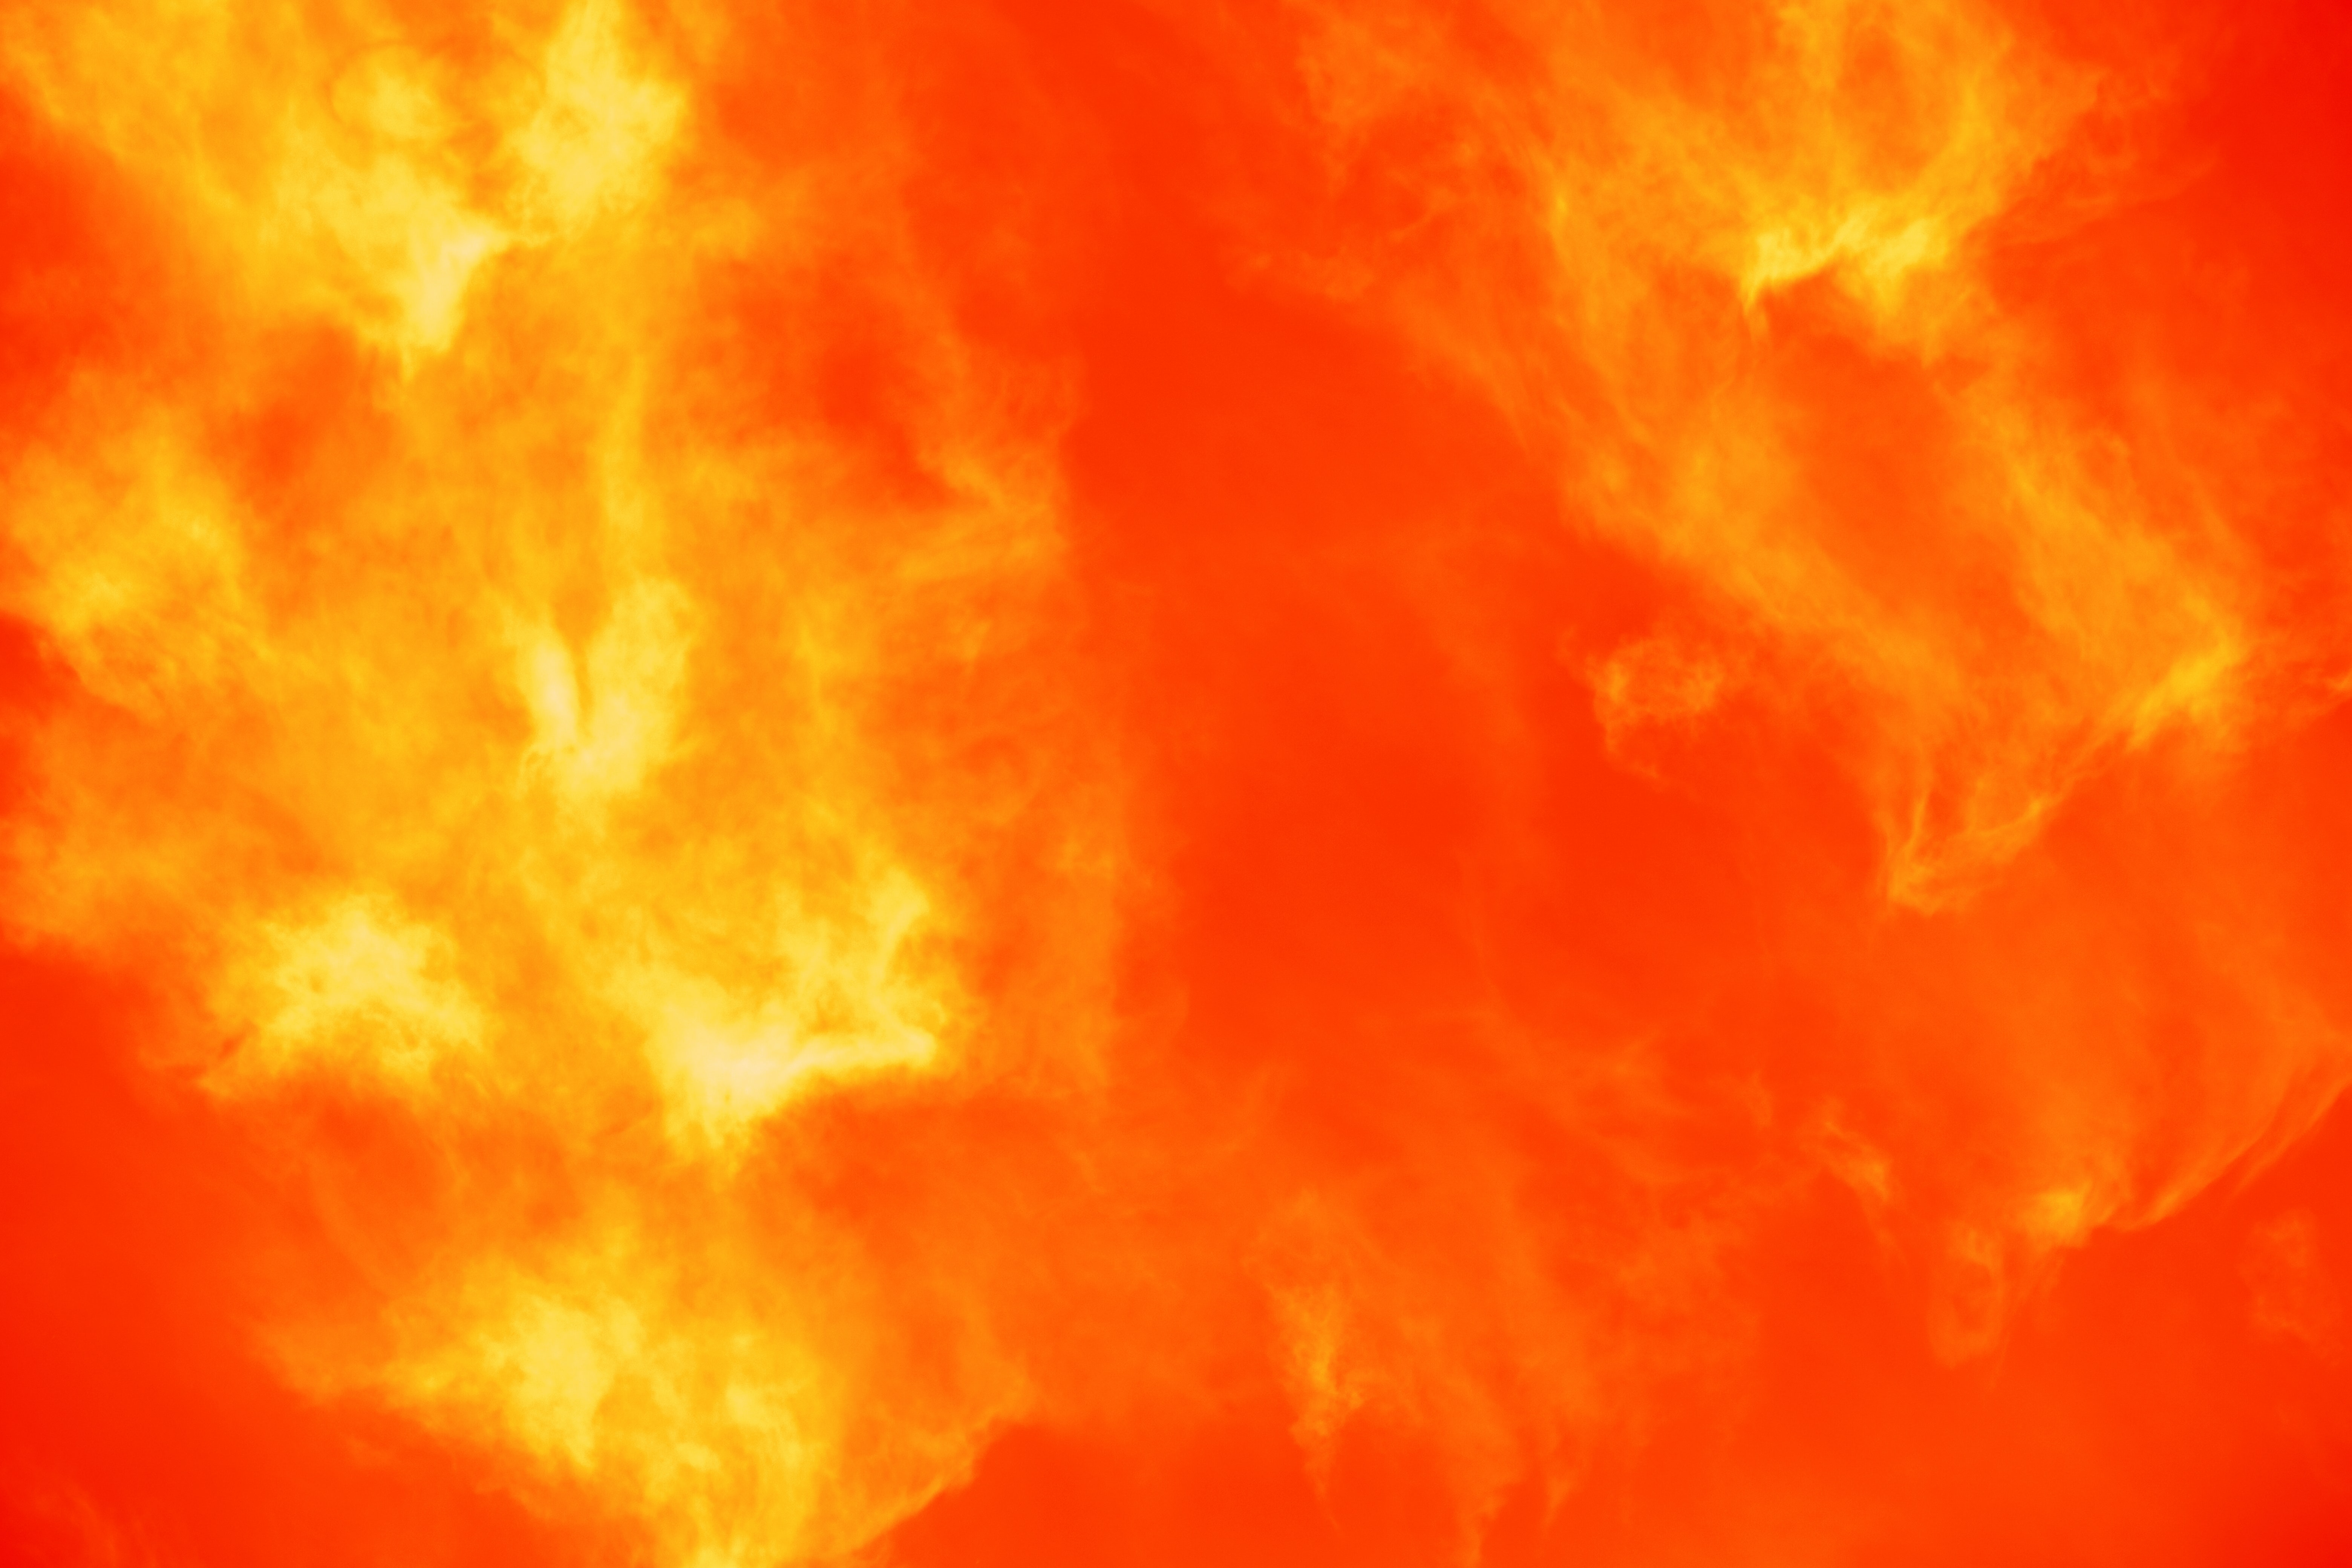 66063 download wallpaper abstract, gradient, smoke, orange screensavers and pictures for free